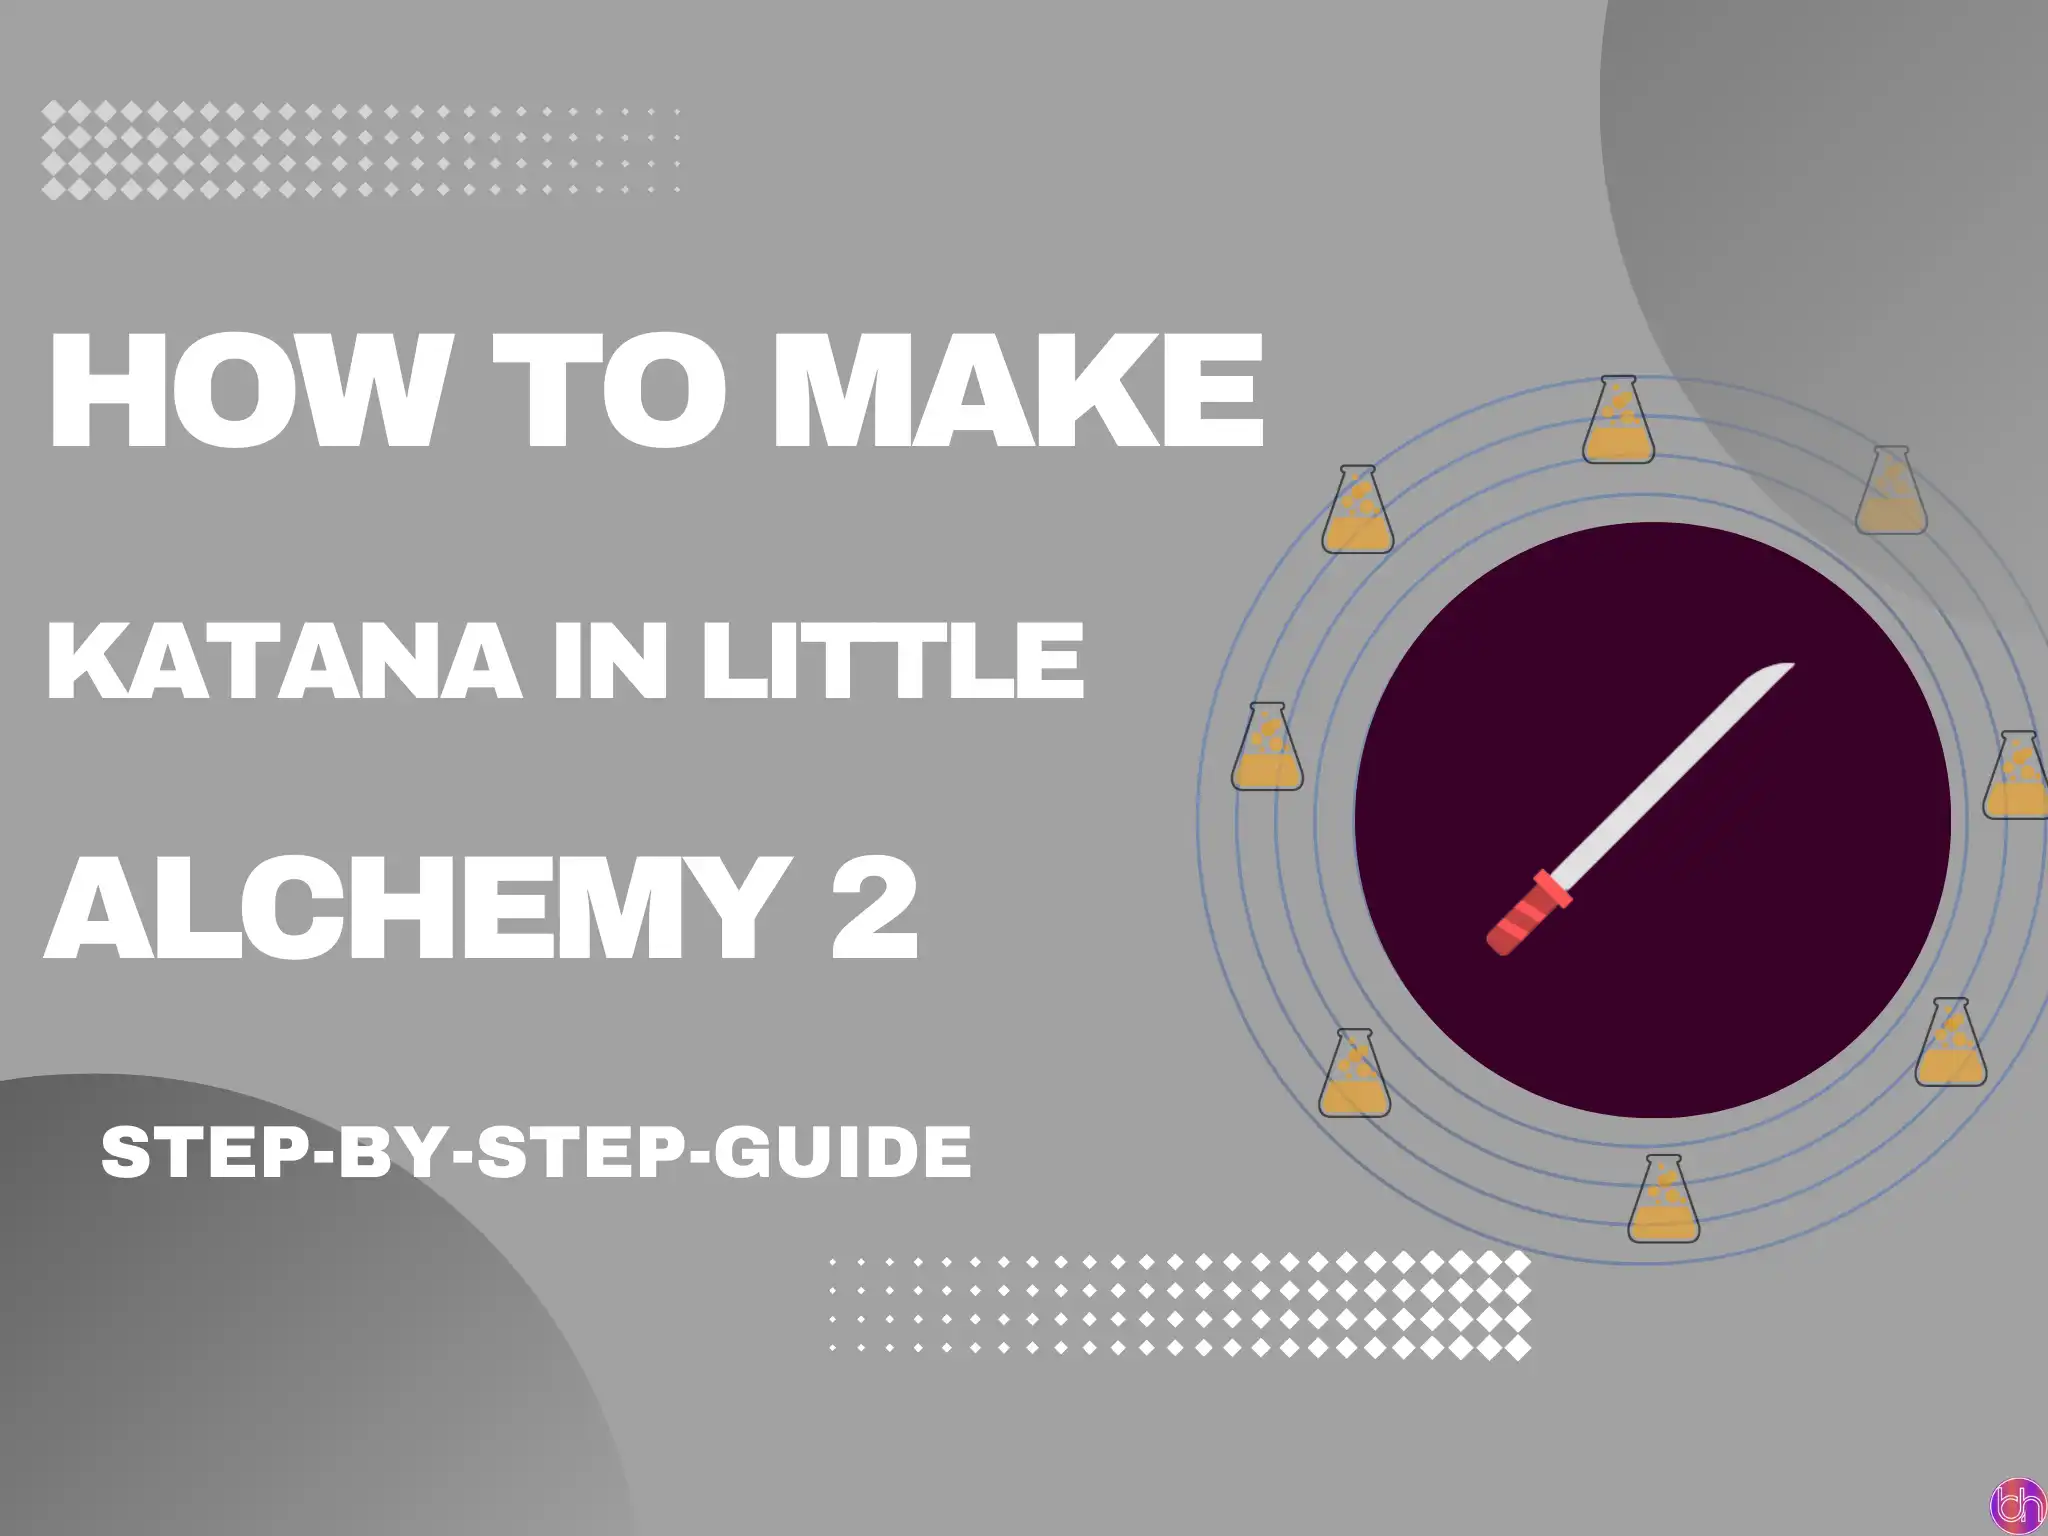 How to make Katana in Little Alchemy 2